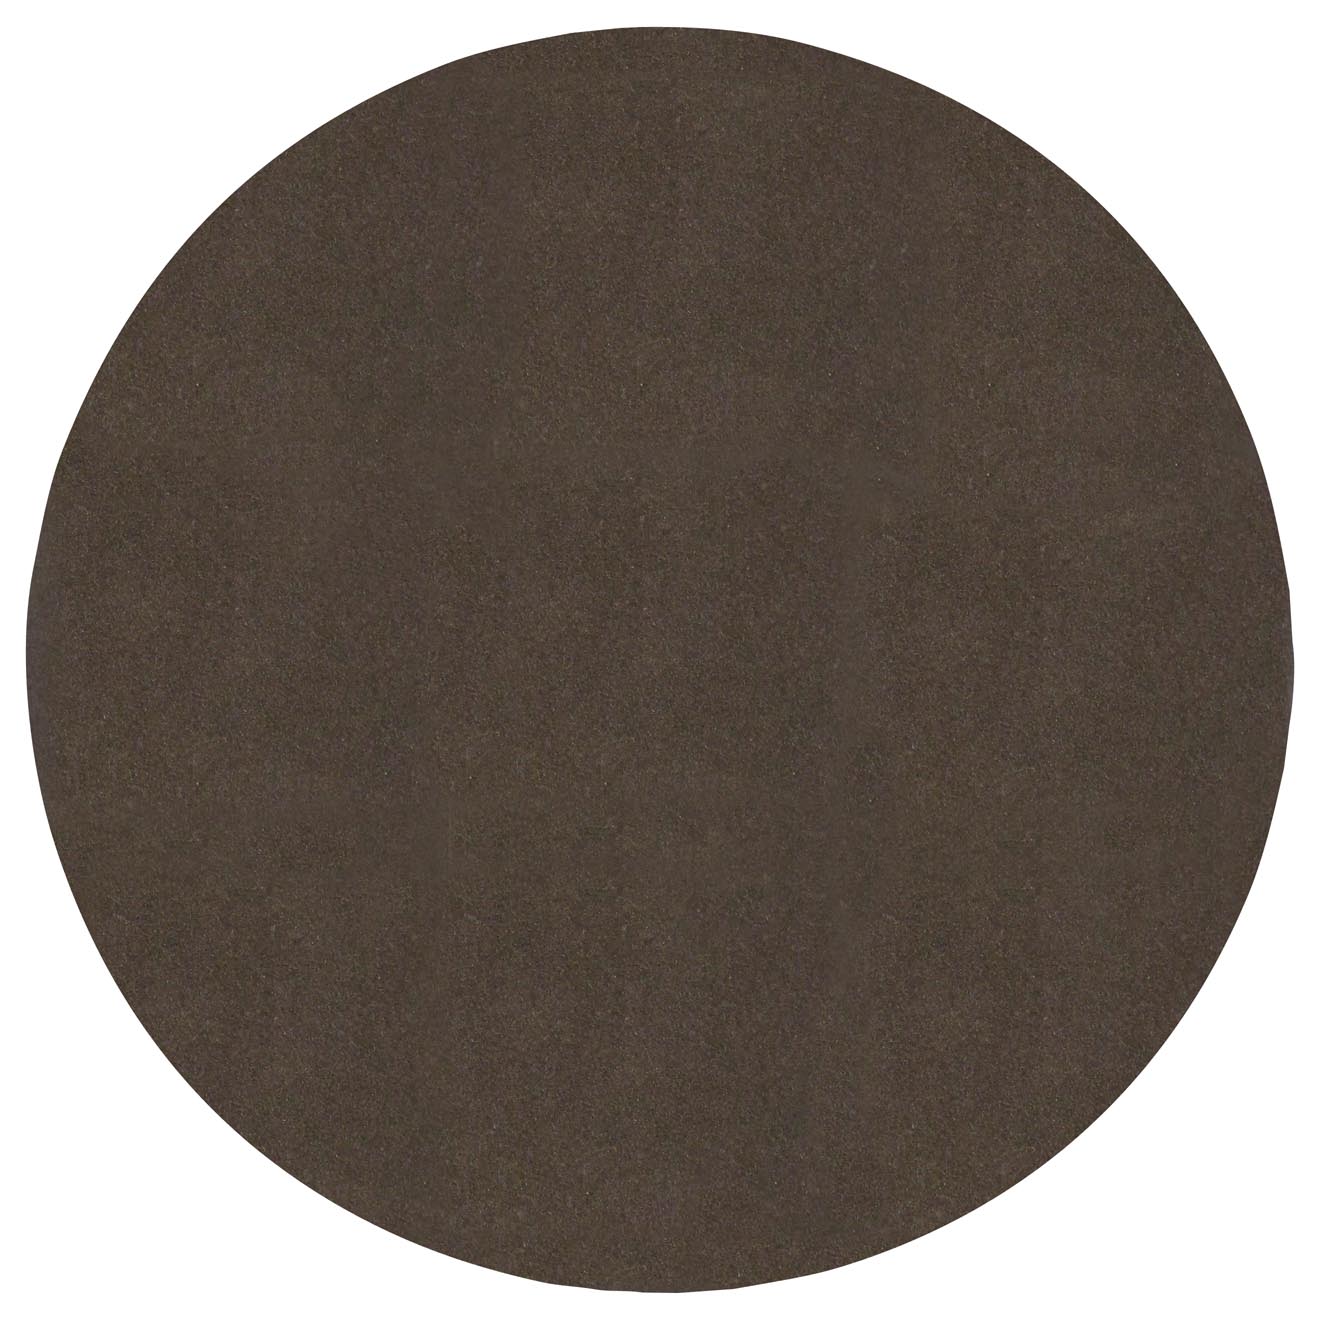 4" TO 10" ROUND BROWN FELT PADS ADHESIVE BACK FOR LAMP BASES 